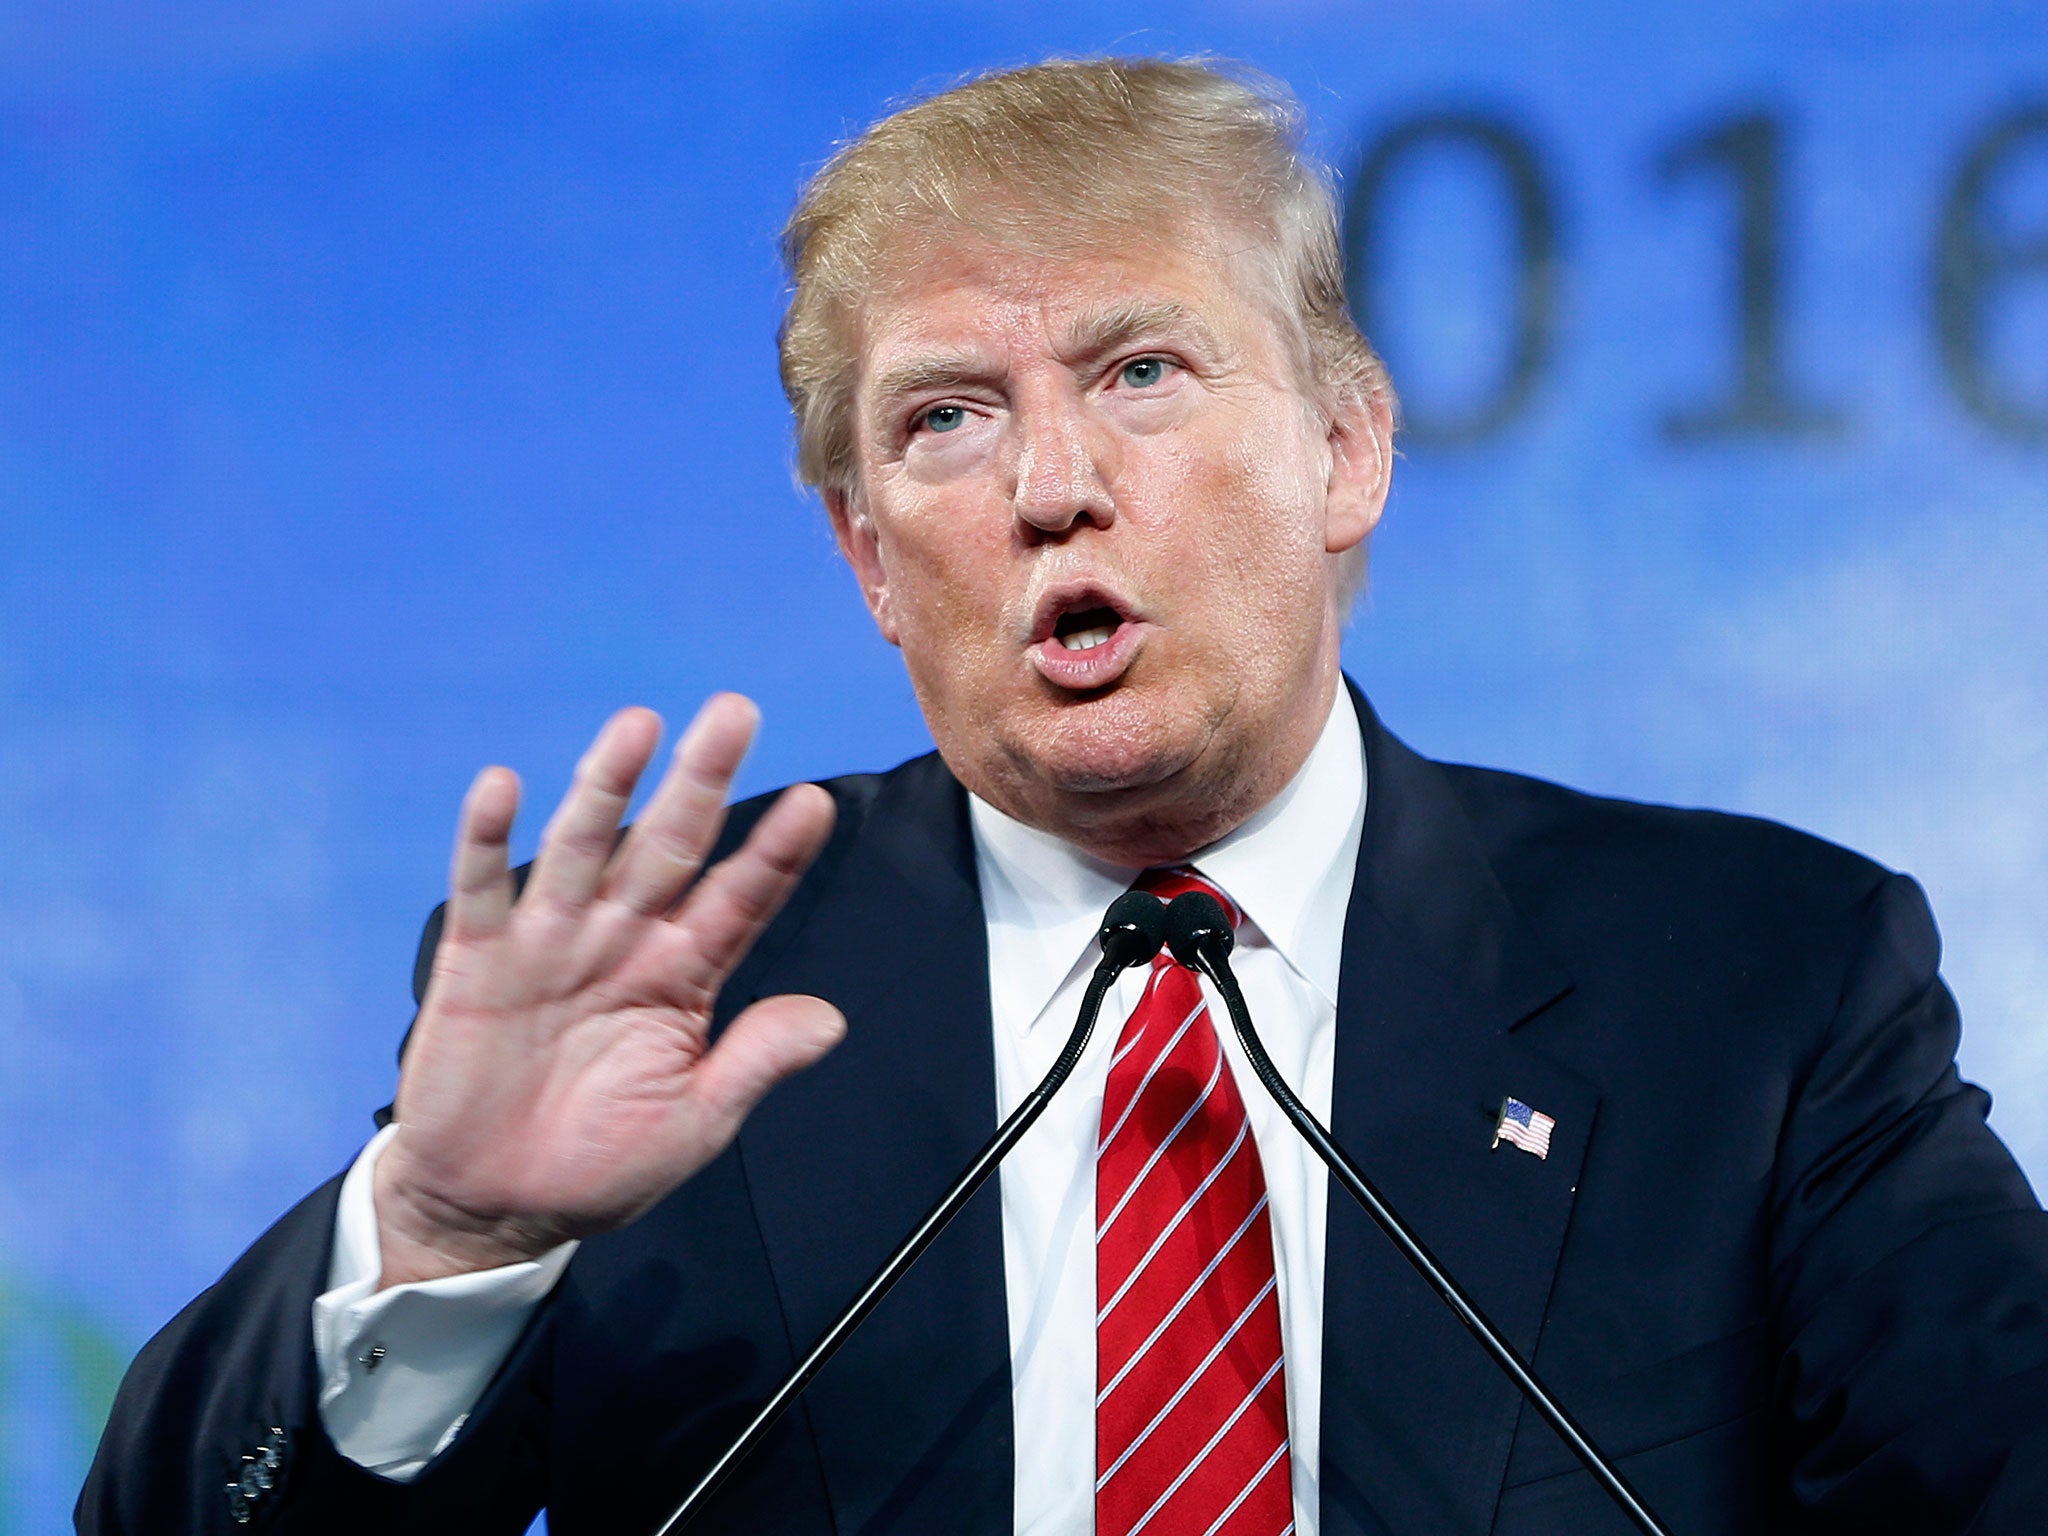 Donald Trump announced his candidacy for President of the United States in June 2016